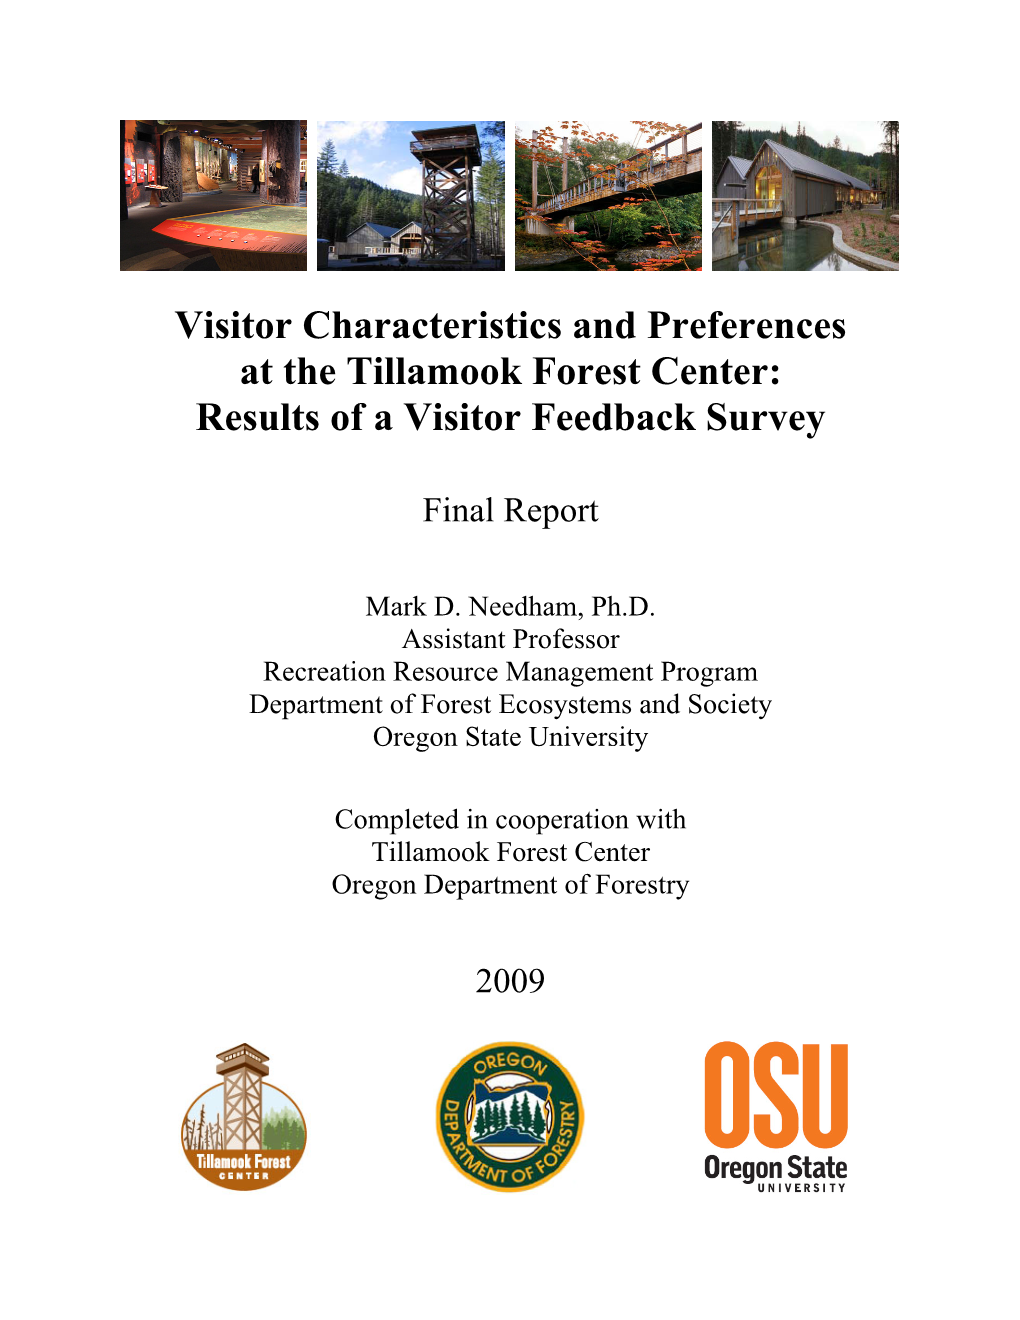 Visitor Characteristics and Preferences at the Tillamook Forest Center: Results of a Visitor Feedback Survey